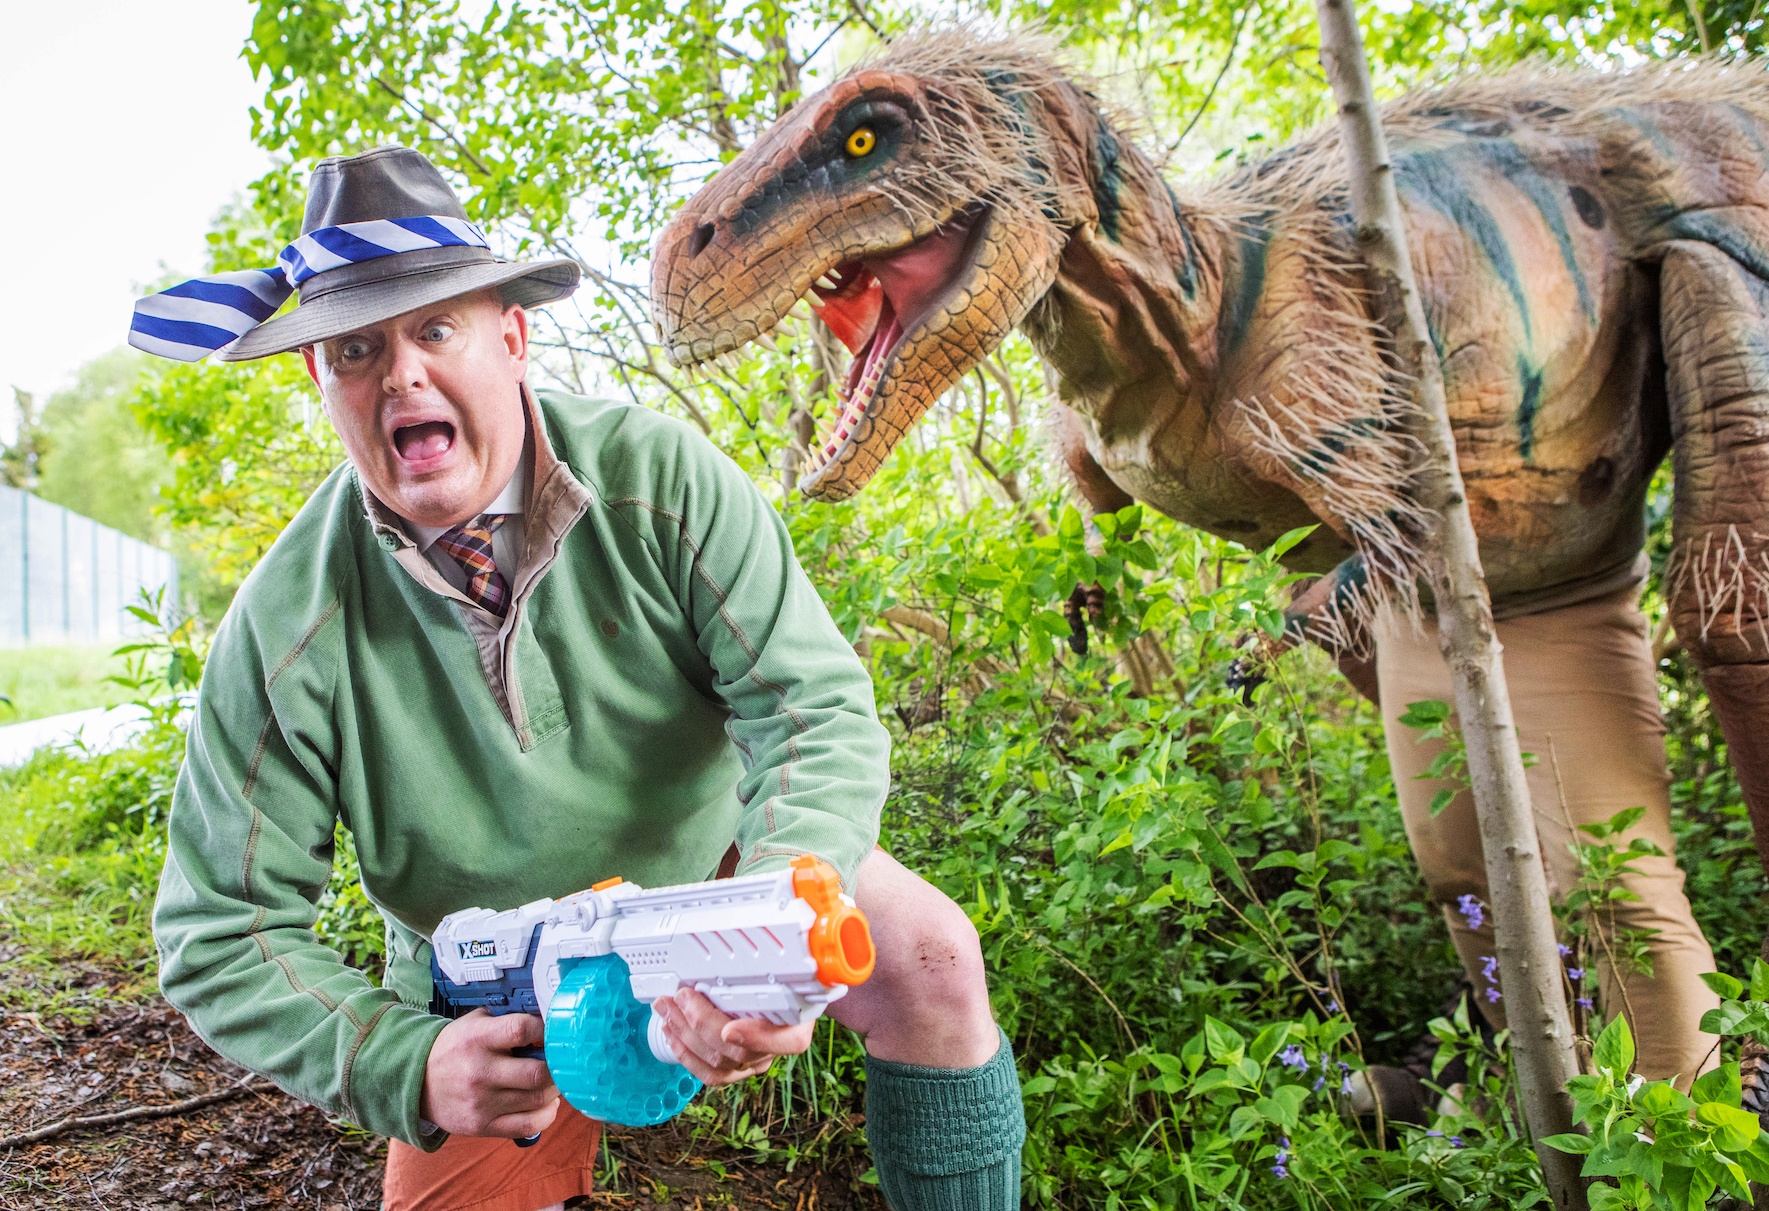 Kelvinside Academy rector Dan Wyatt even makes a special appearance as a gamekeeper hunted by vicious velociraptors.